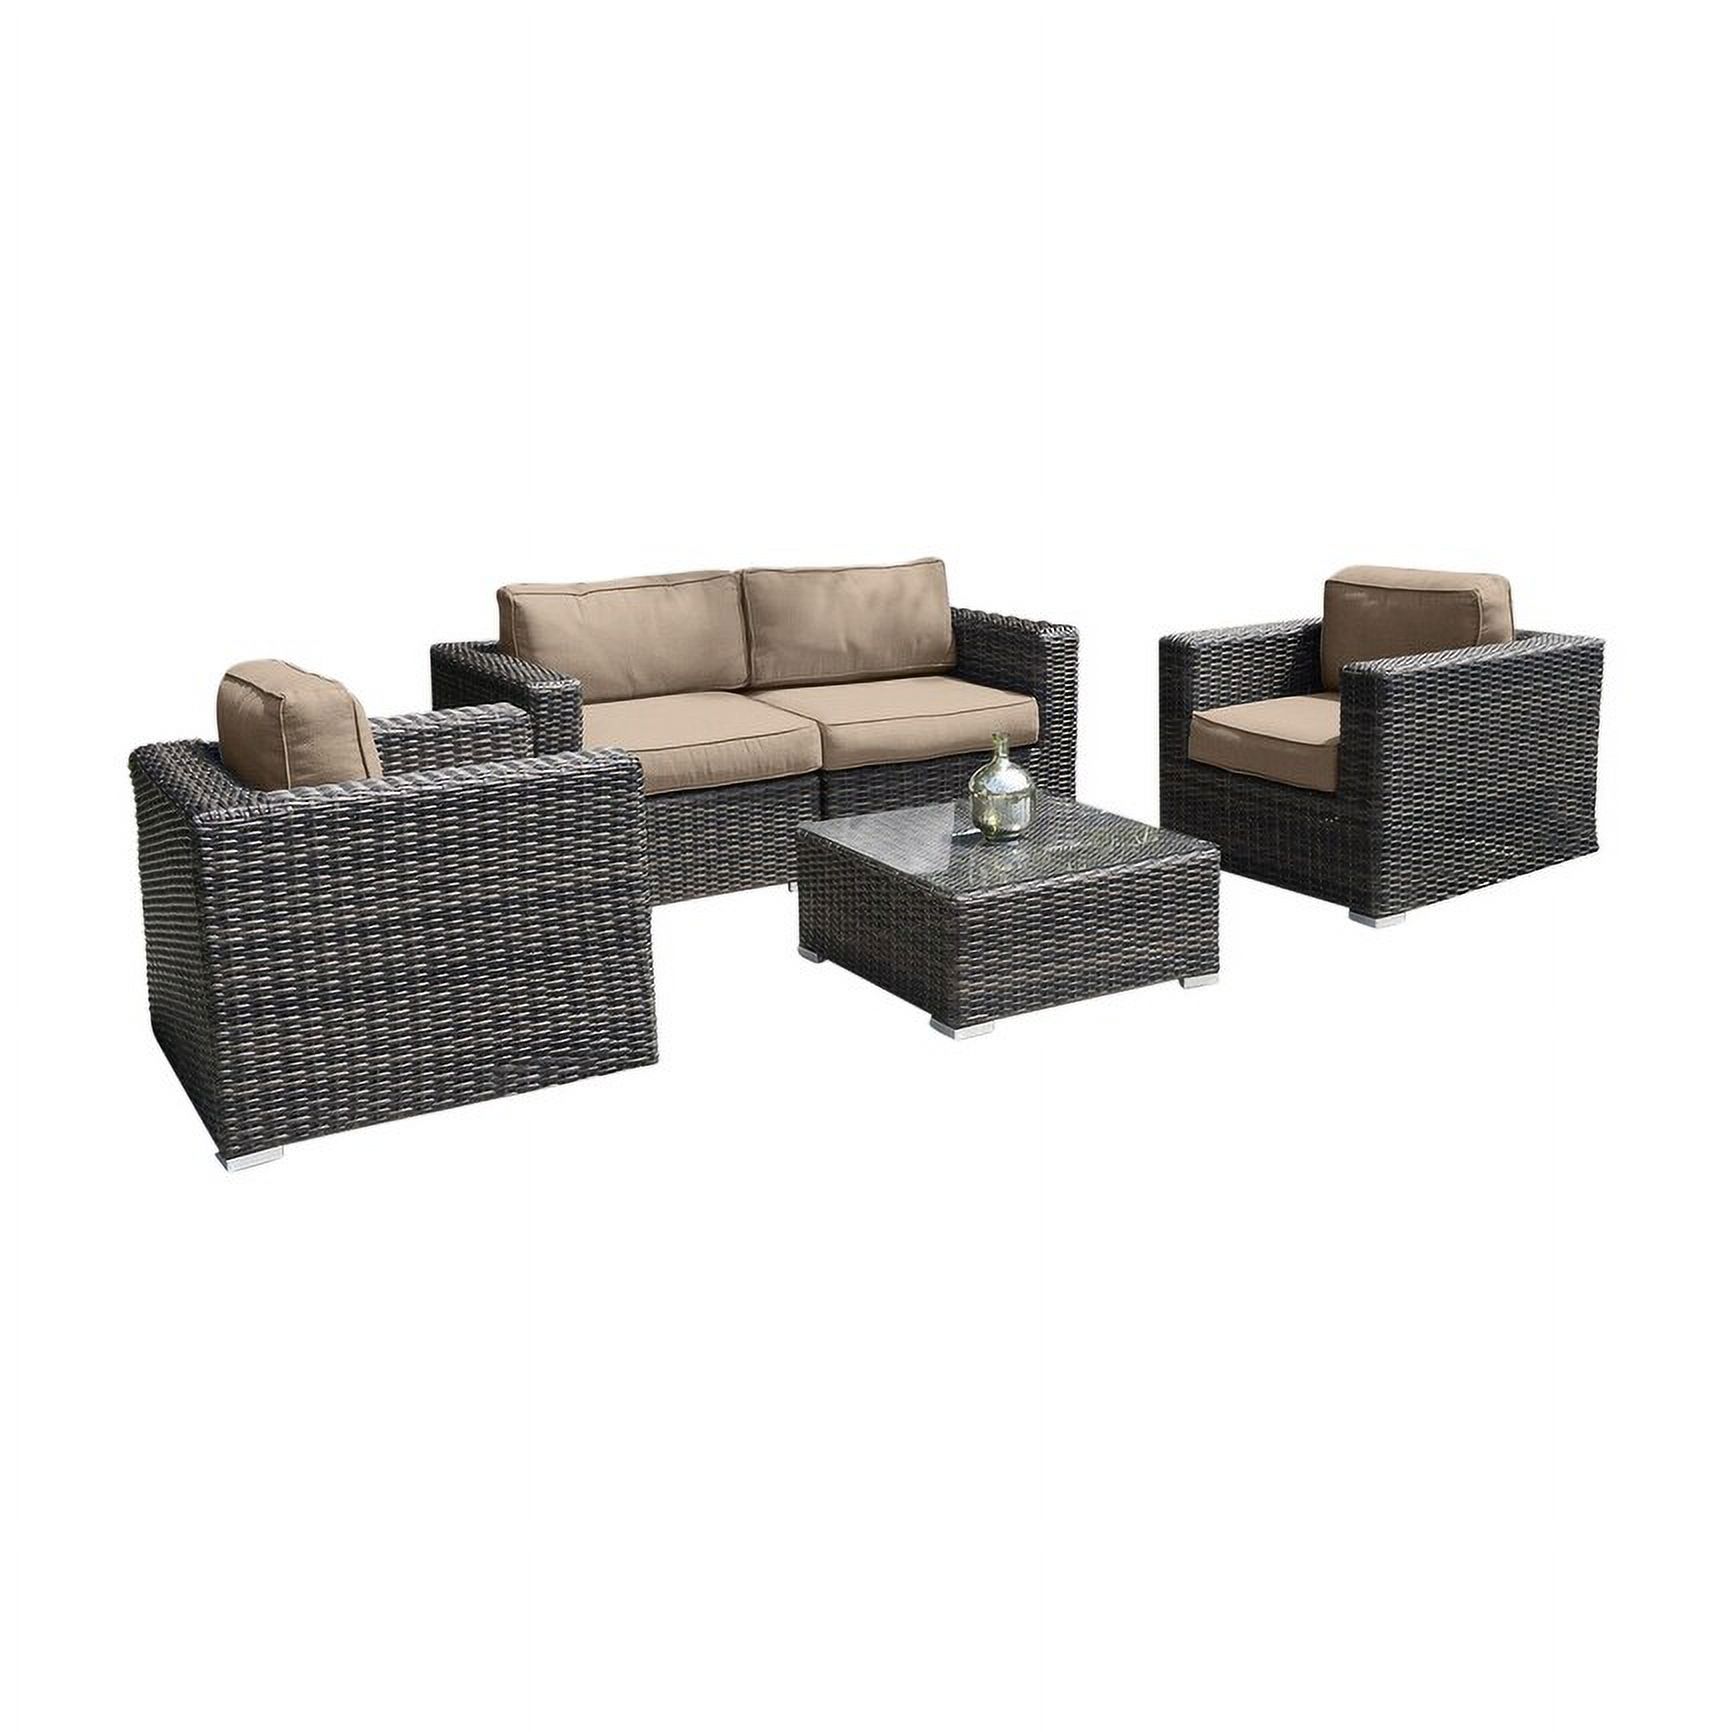 Living Source International 5-Piece Wicker Sectional Group in Espresso/Beige - image 2 of 5